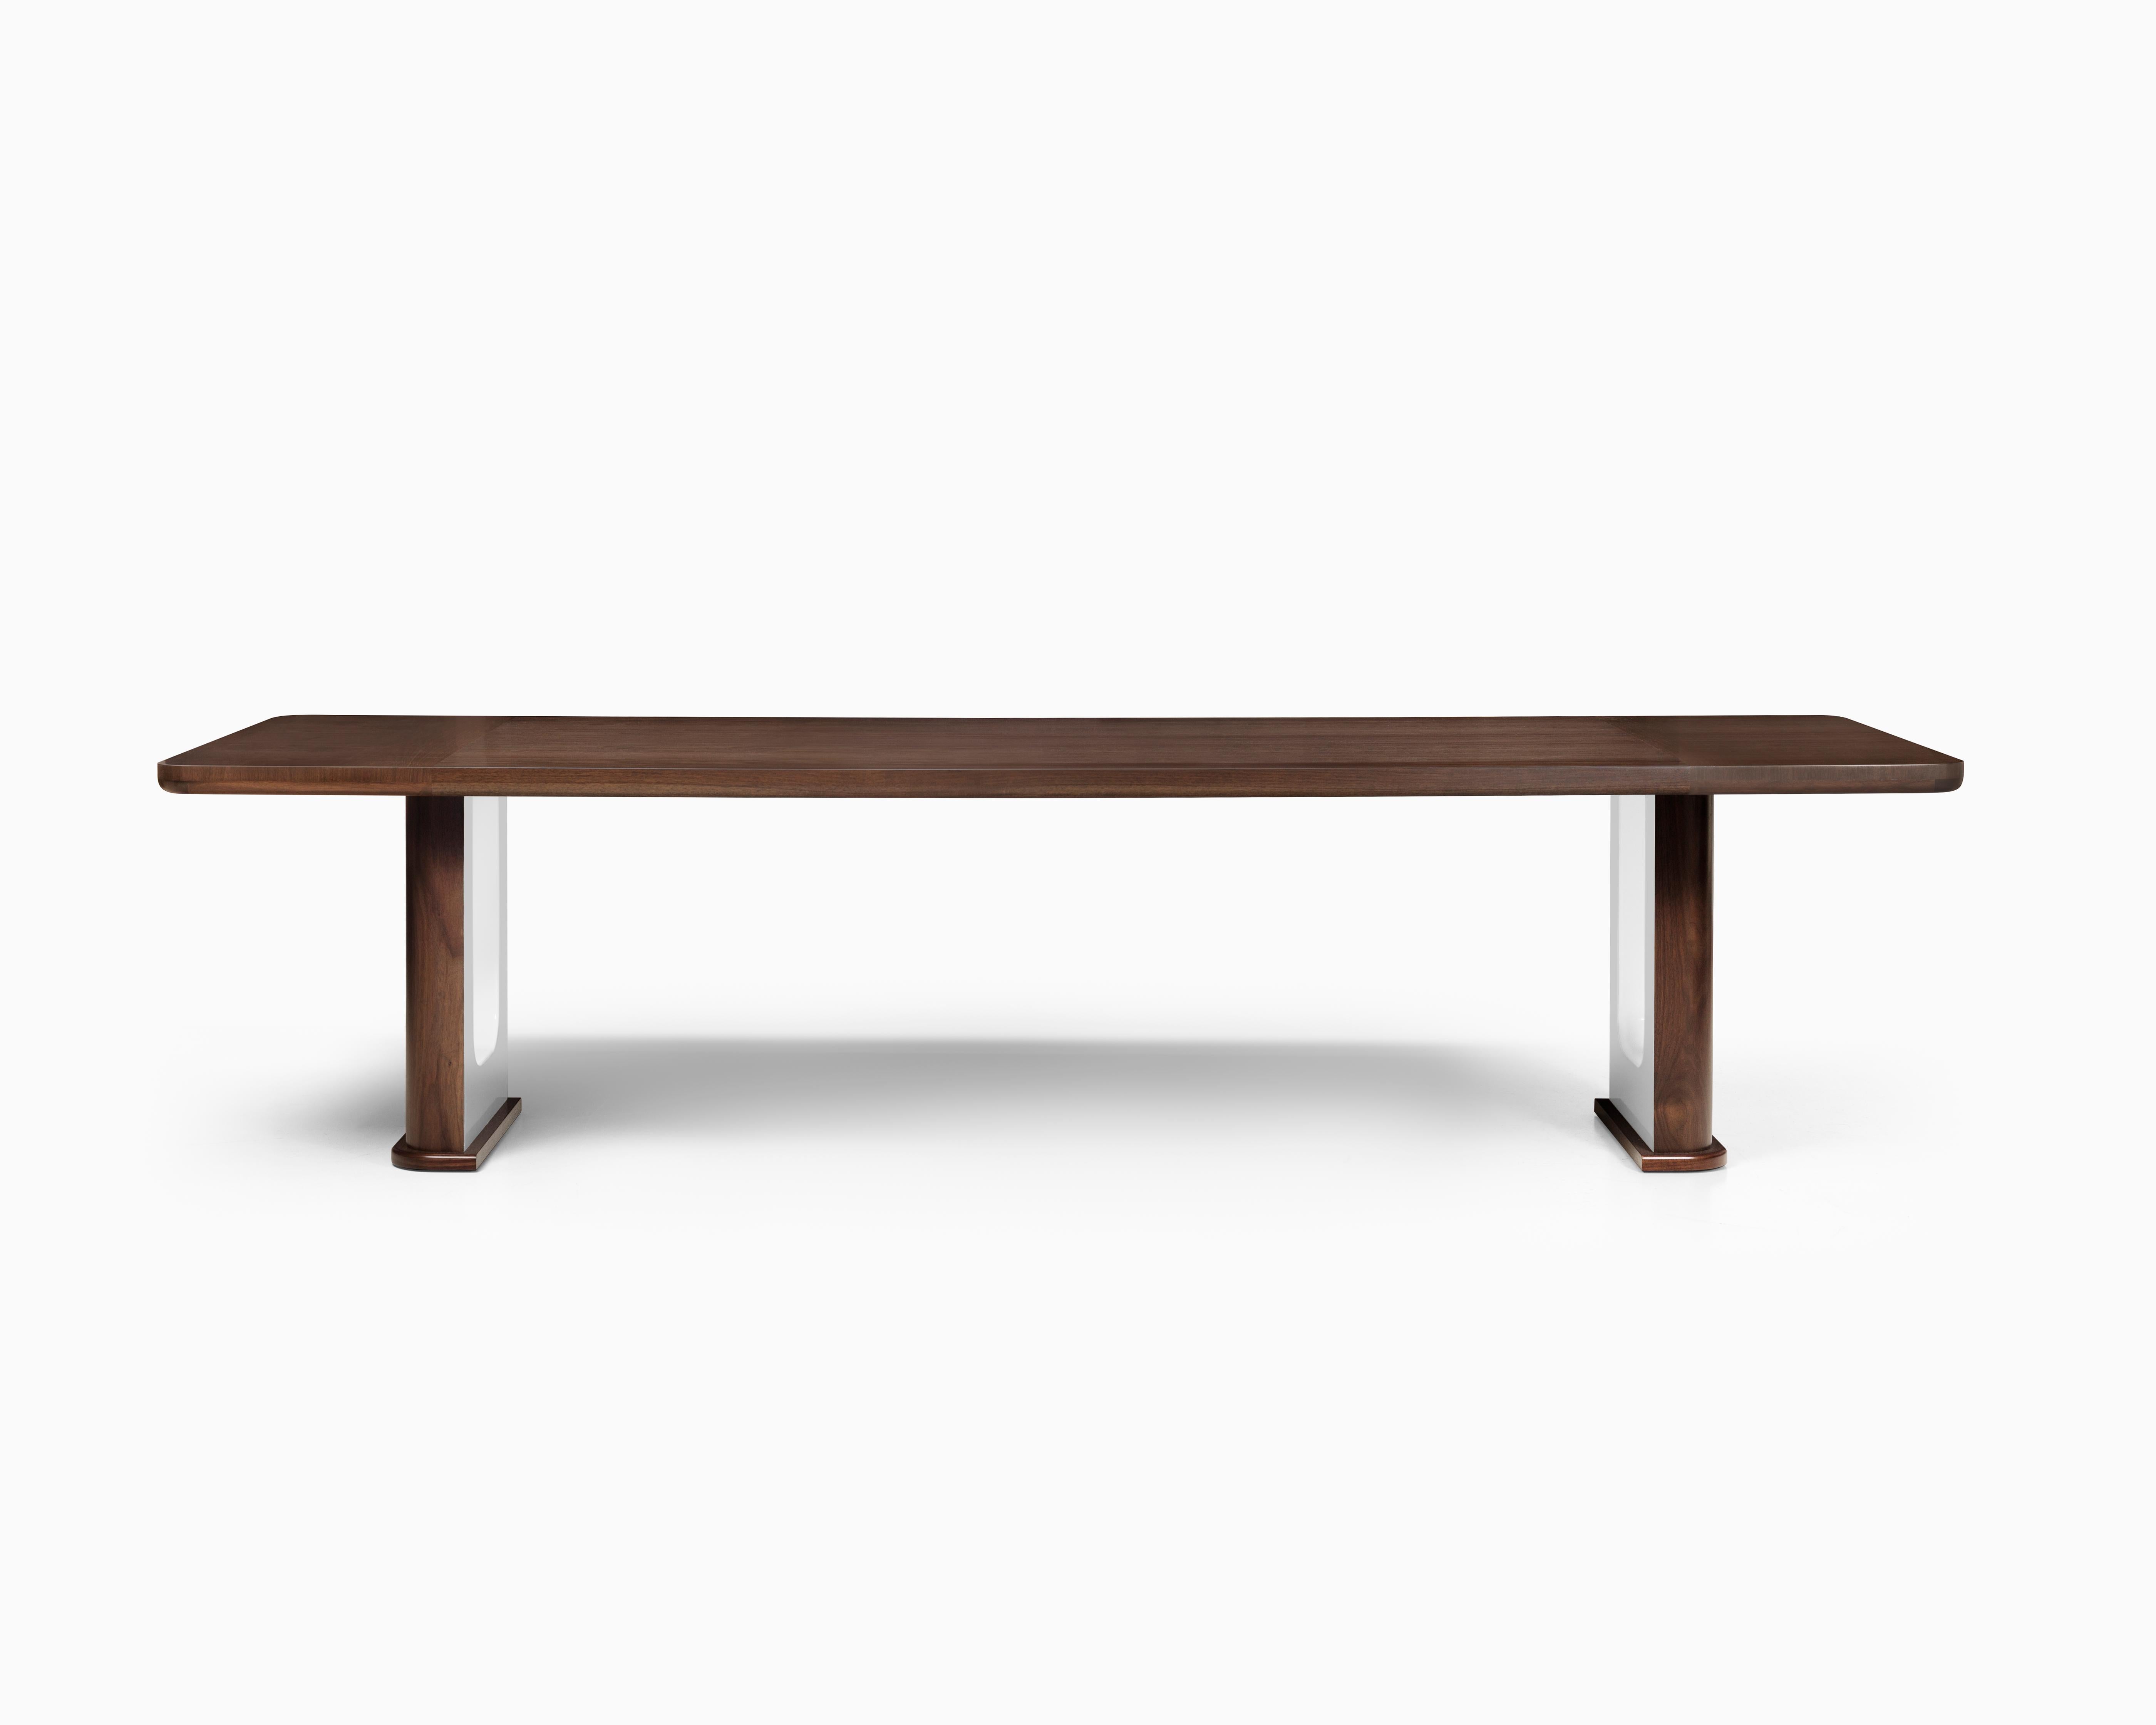 Multi-layer lacquered base detail highlights the hand-applied walnut finish on the Rift Dining Table. Create your signature look by combining standard lacquer and wood finishes. Choose from Dove, Midnight, Plum, Royal, Sable or White Bronze for the